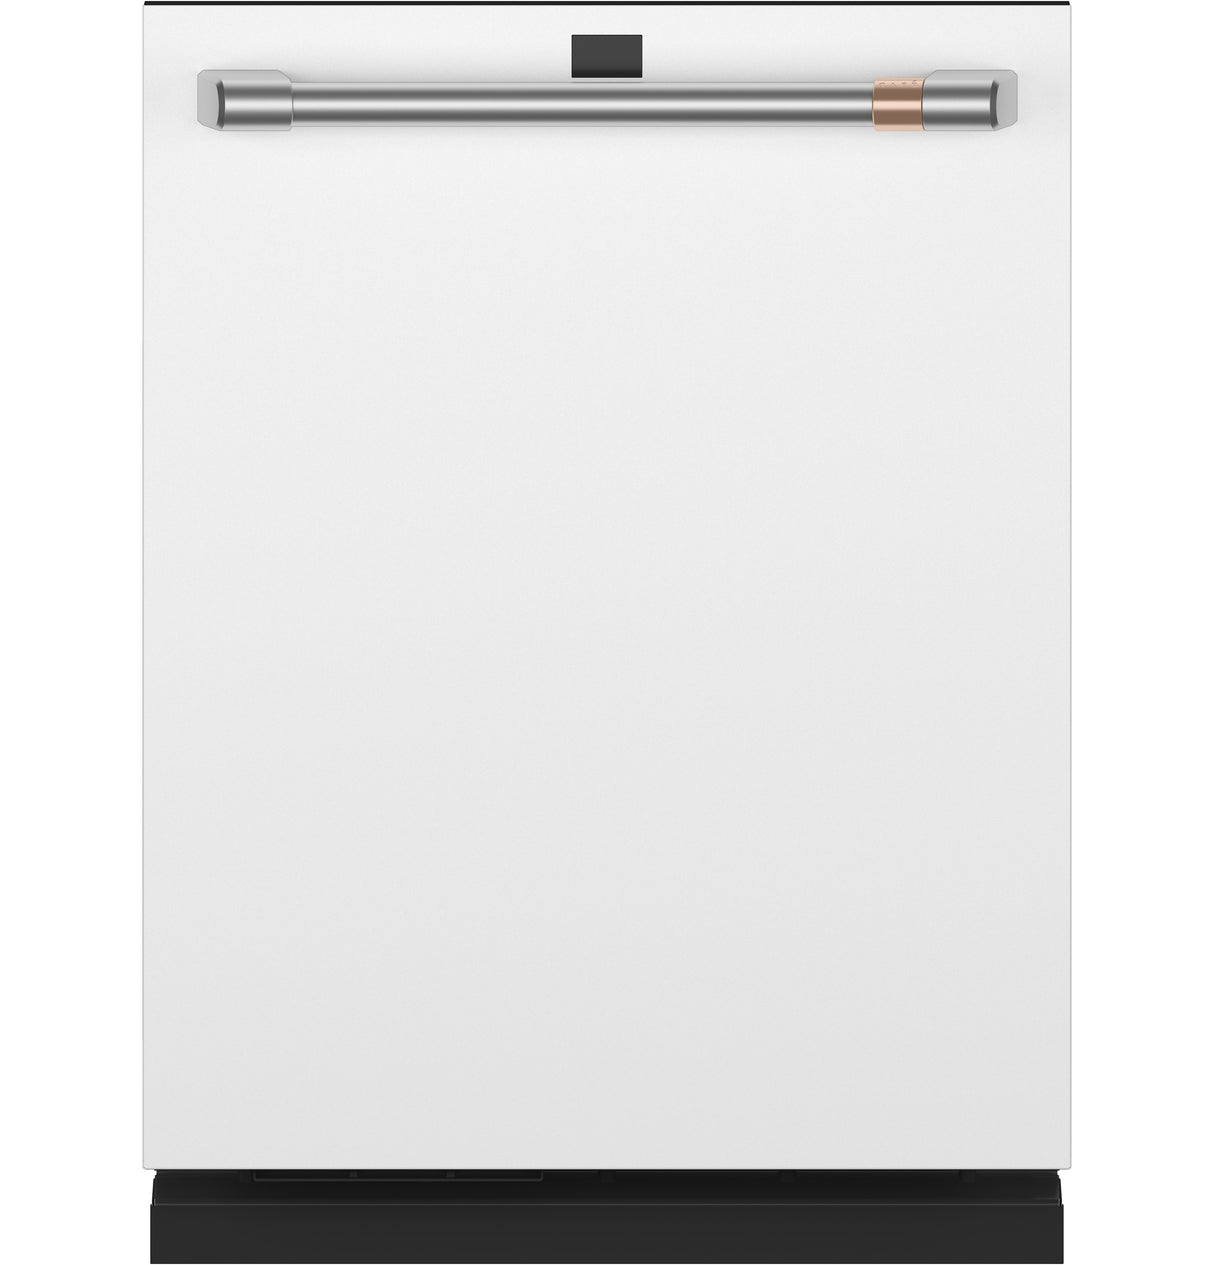 Caf(eback)(TM) ENERGY STAR(R) Smart Stainless Steel Interior Dishwasher with Sanitize and Ultra Wash & Dual Convection Ultra Dry - (CDT875P4NW2)